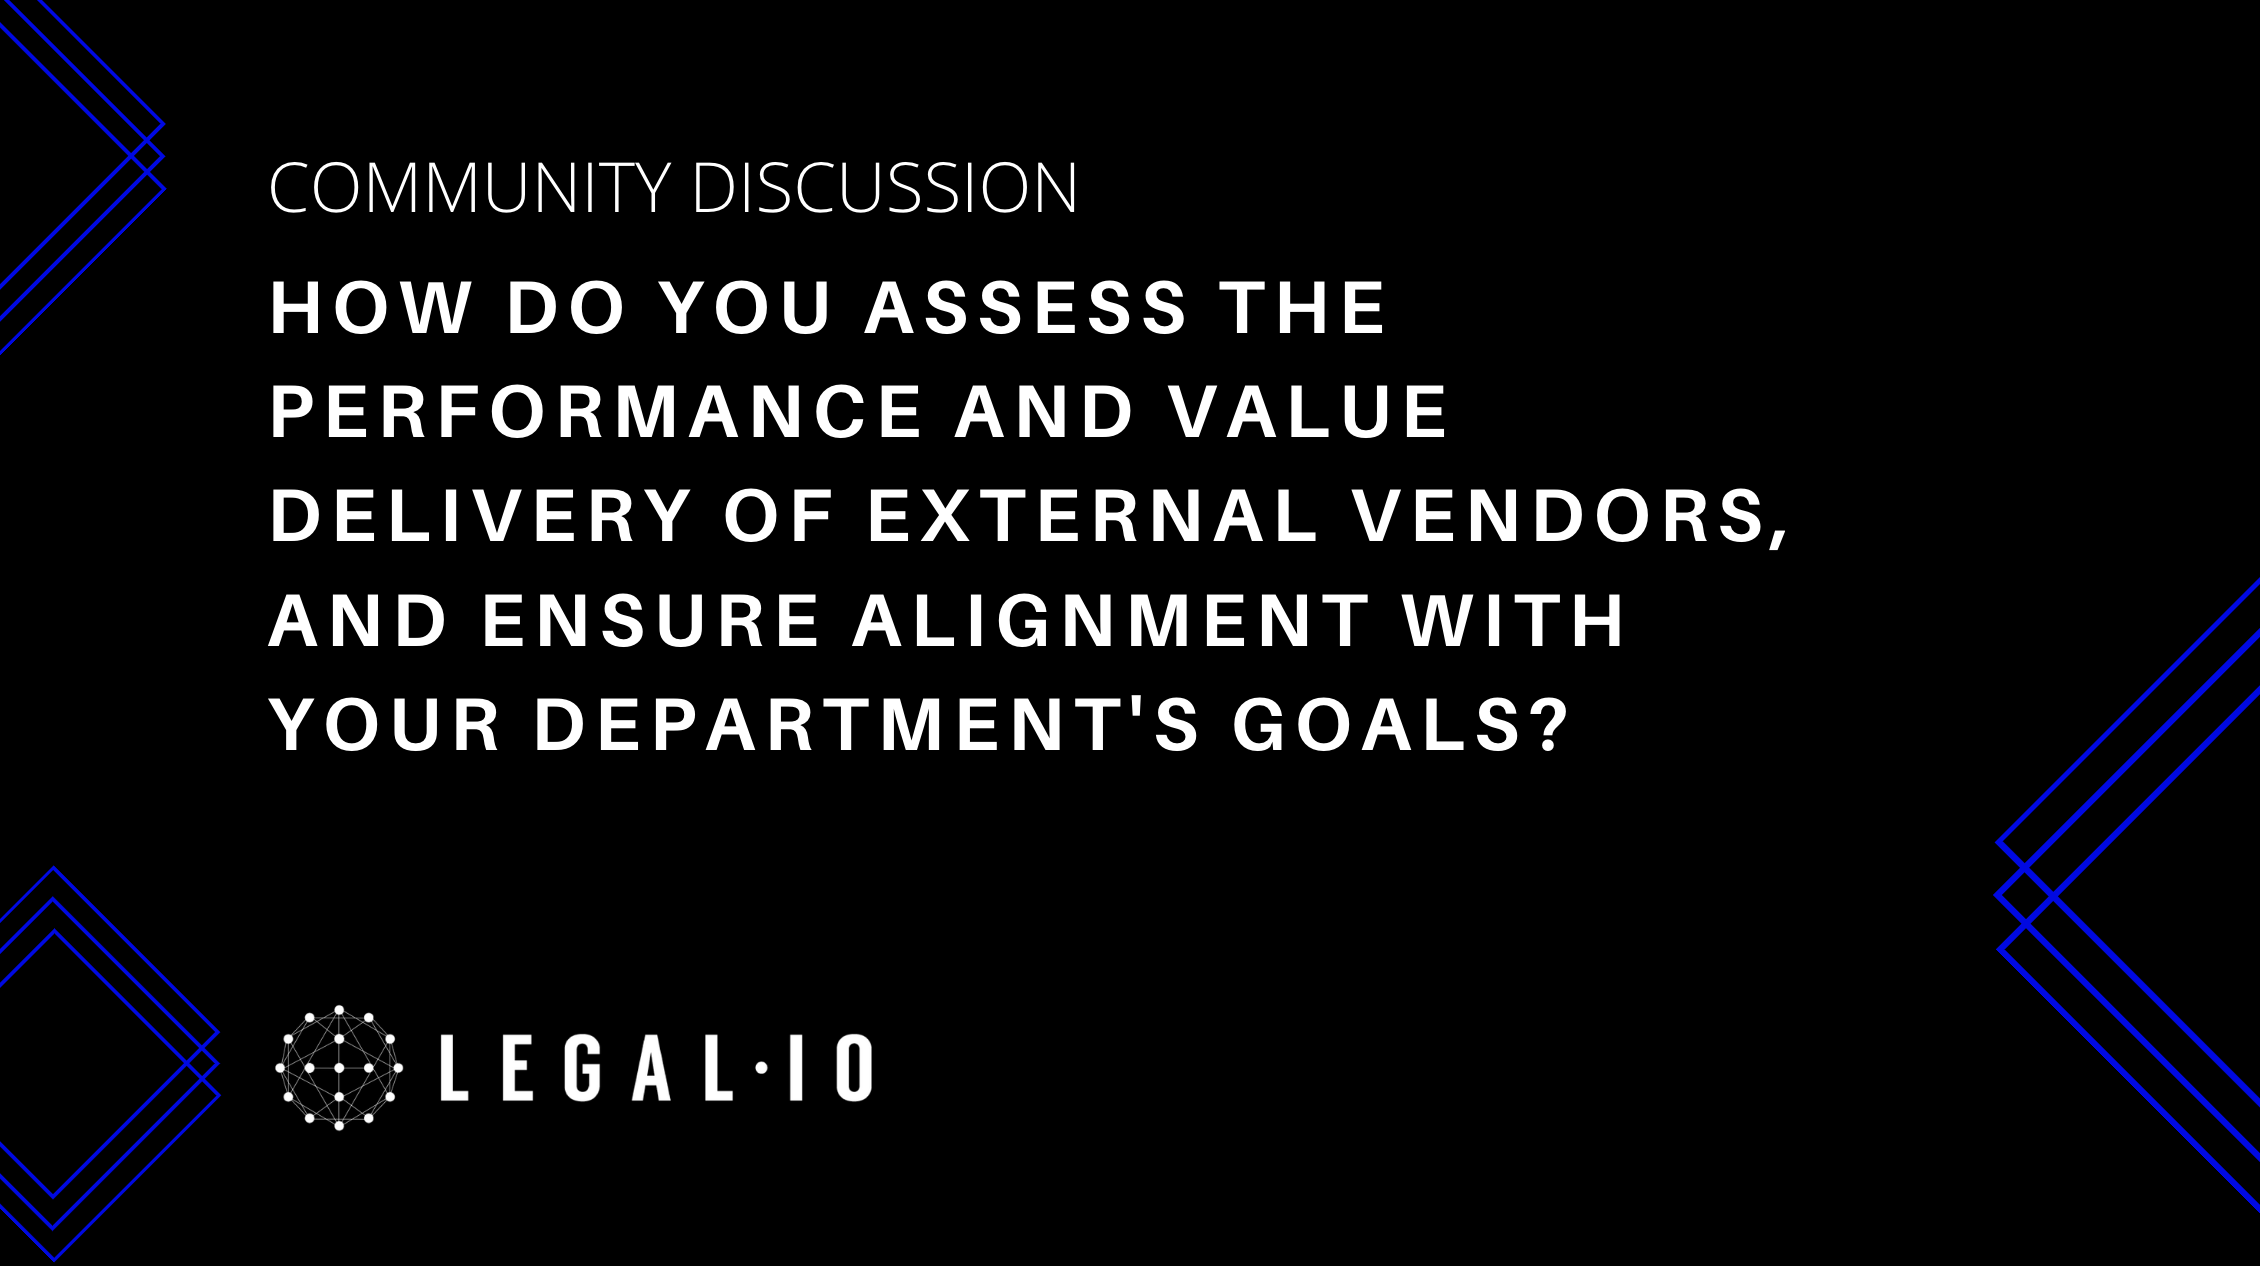 Community Discussion: How do you assess the performance and value delivery of external vendors, and ensure alignment with your department's goals?